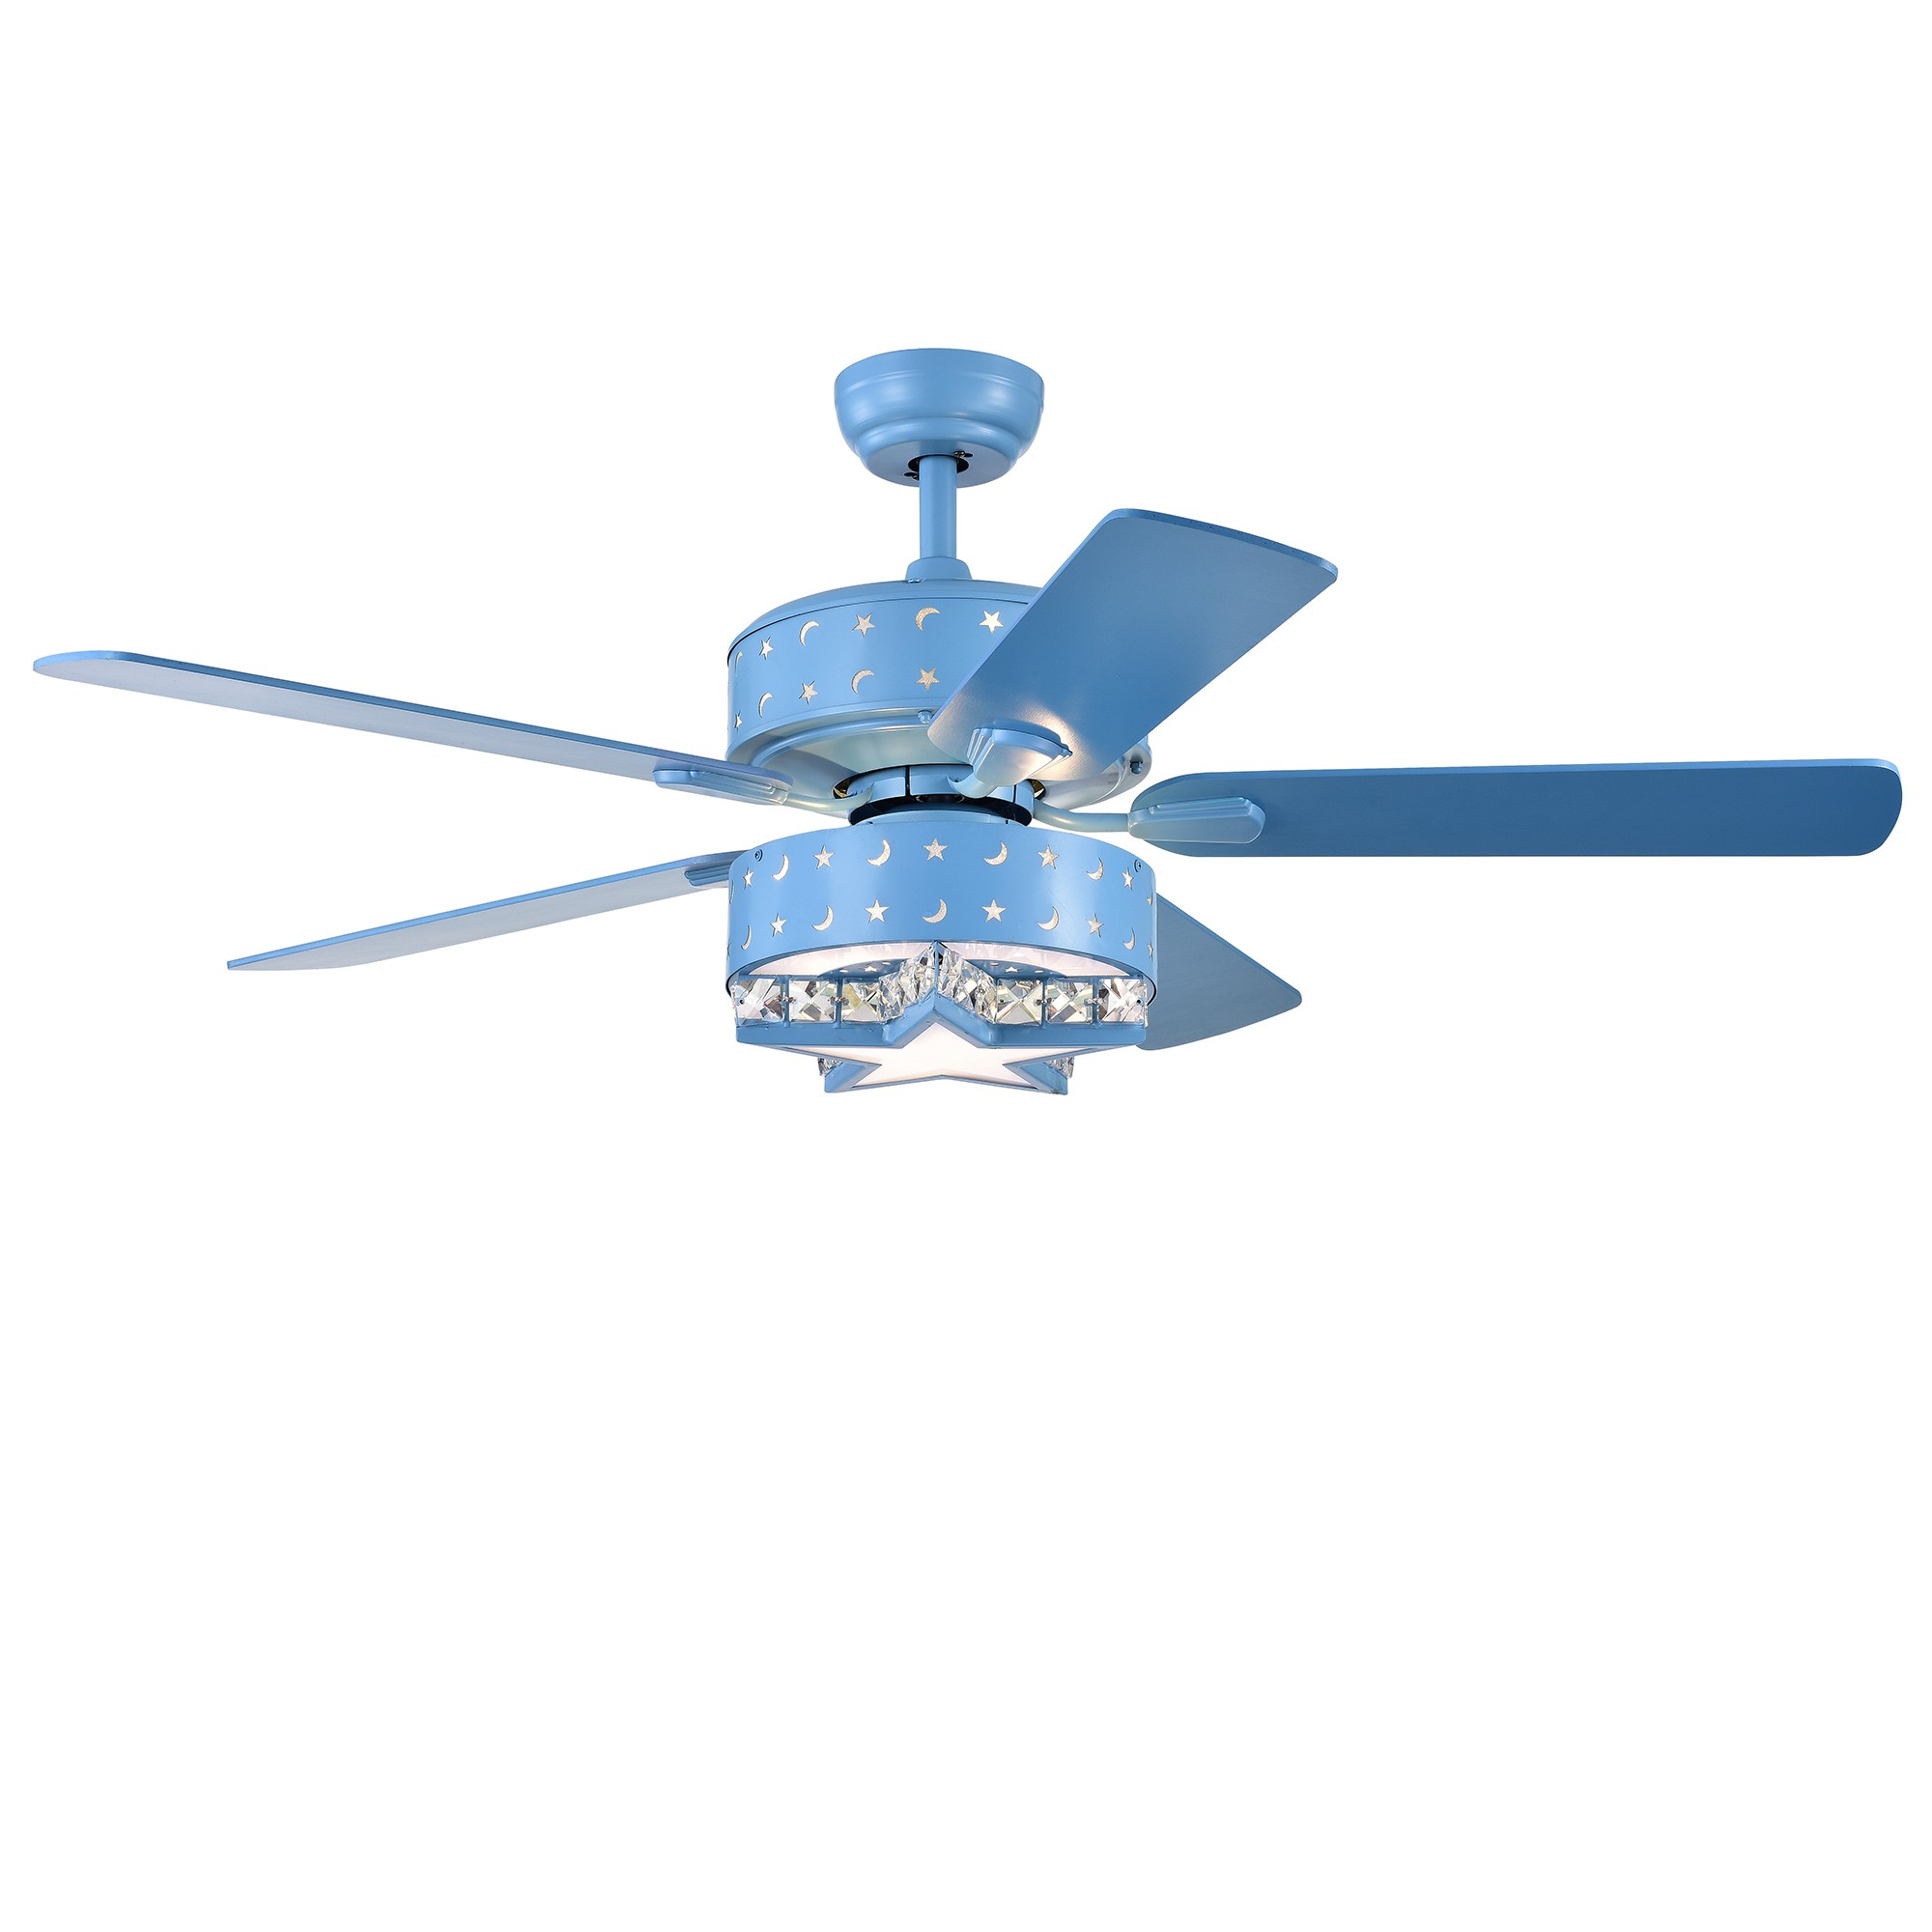 Funder 52-inch Star & Crescent Lighted Ceiling Fan Blue(includes Remote)